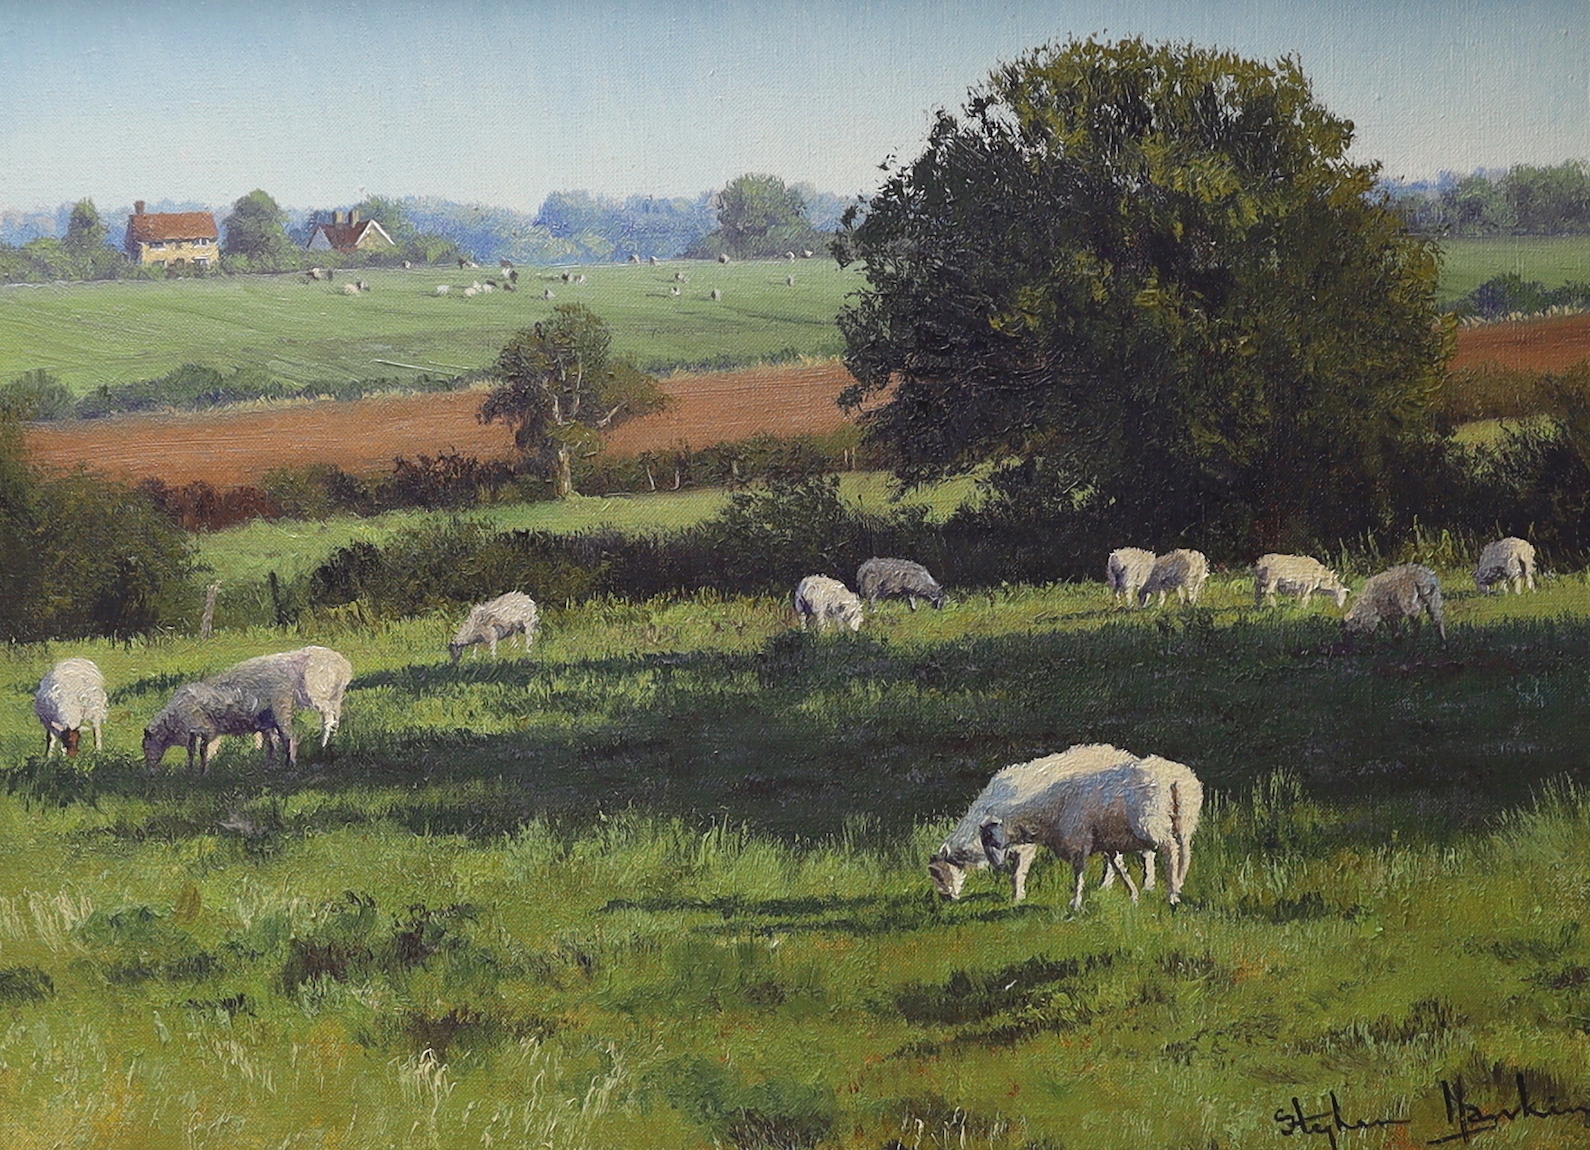 Stephen Hawkins (b. 1964), oil on canvas, ‘Peaceful pastures near Wineham’, signed, The Ashdown Gallery label verso, 29 x 39cm